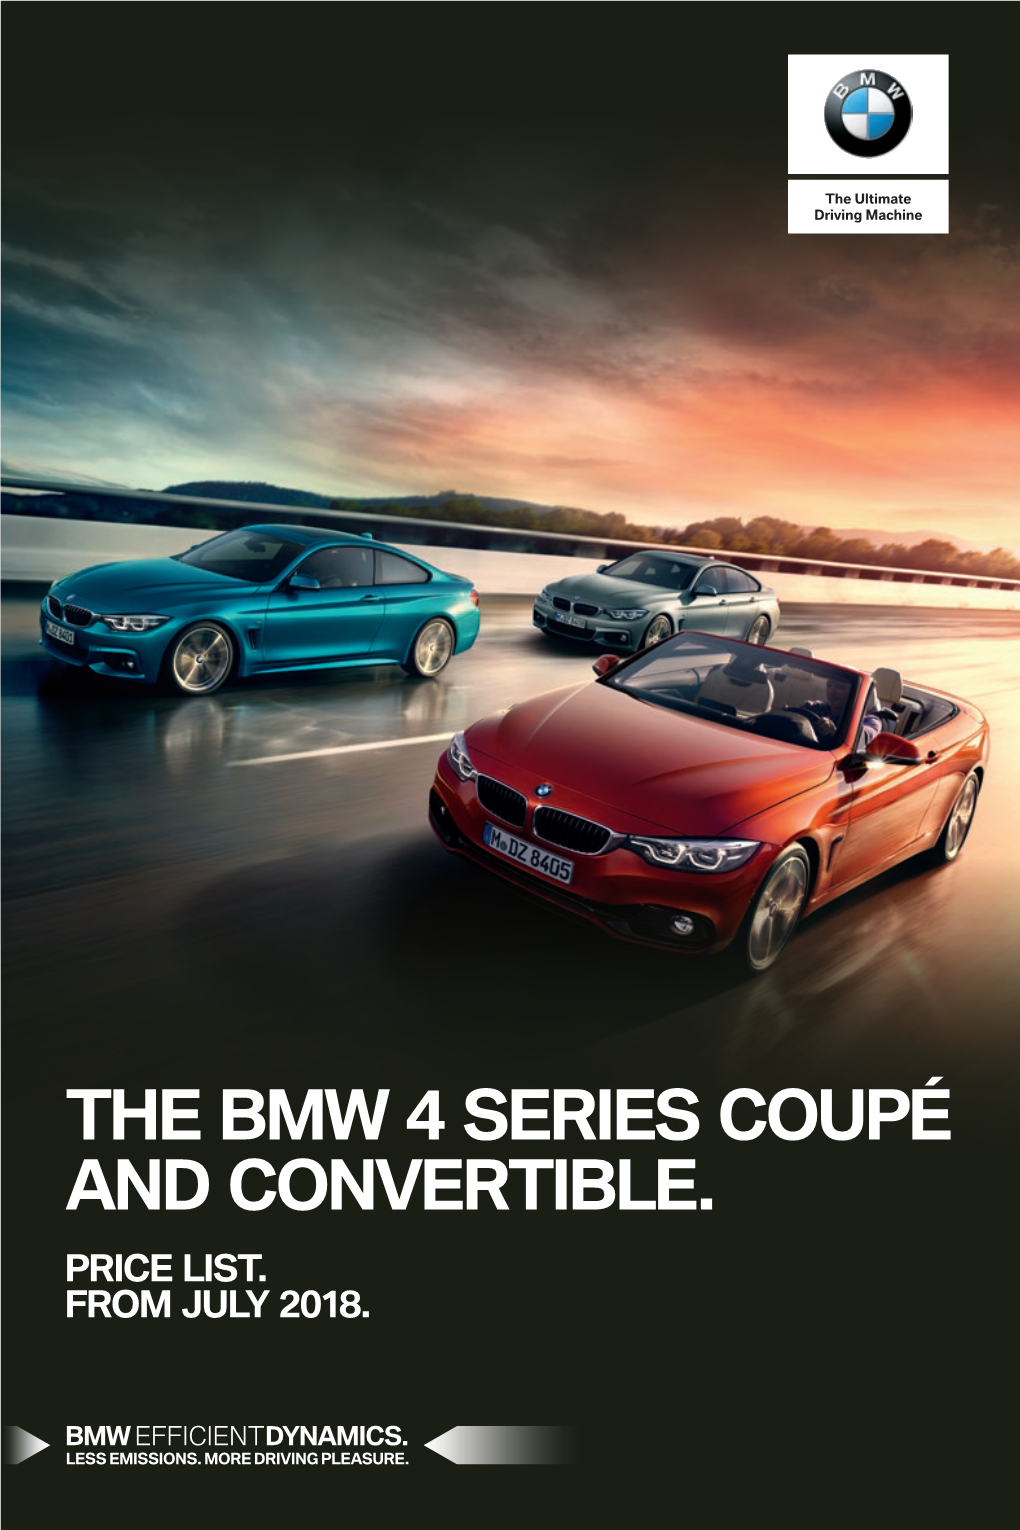 The Bmw 4 Series Coupé and Convertible. Price List